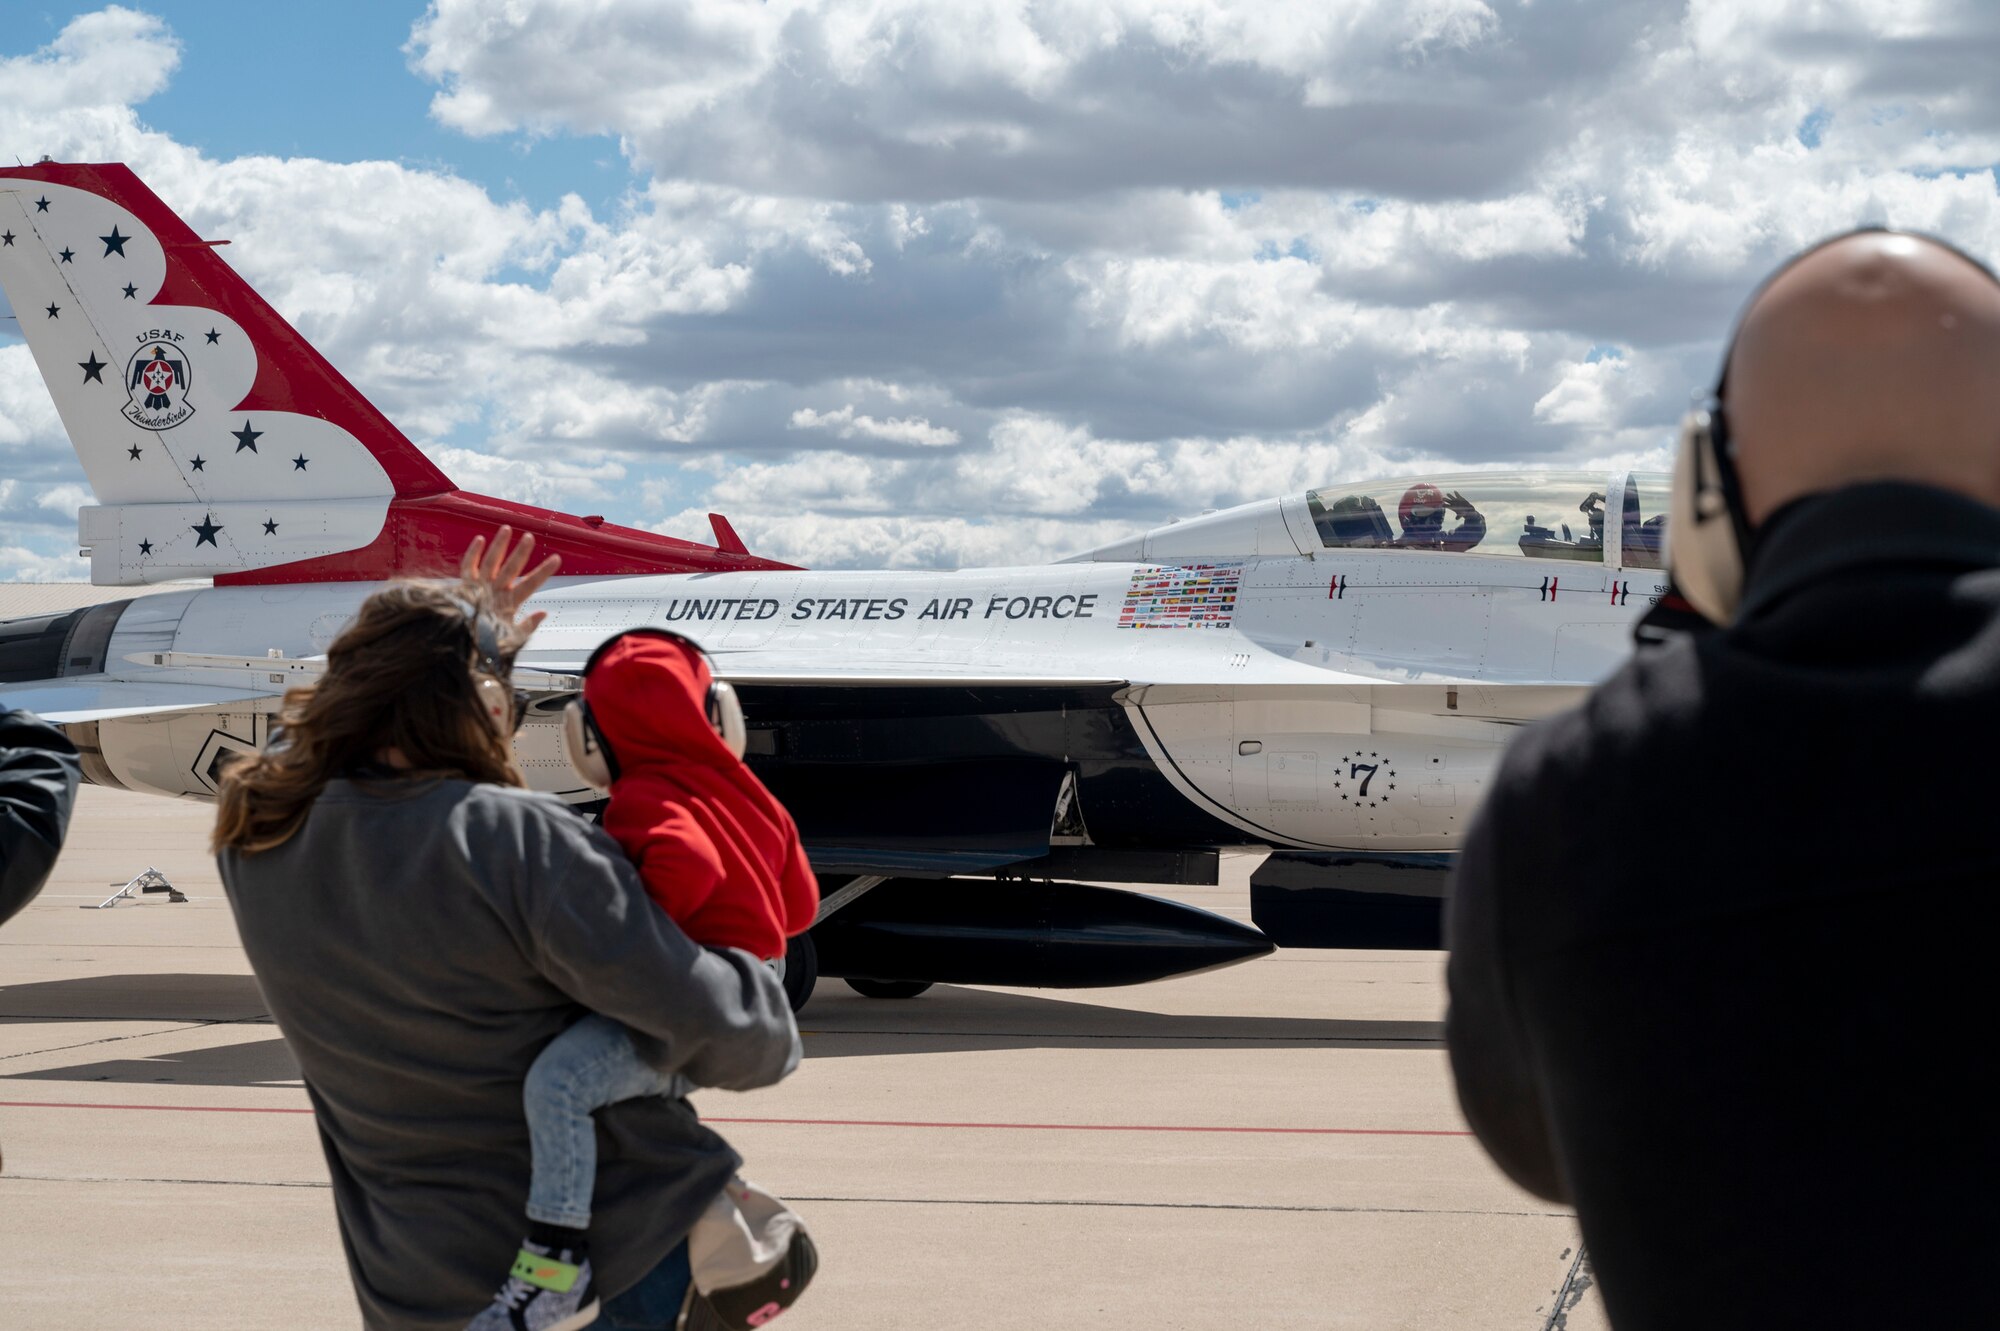 Photo of a mother and child waving at the people inside of an aircraft passing by.